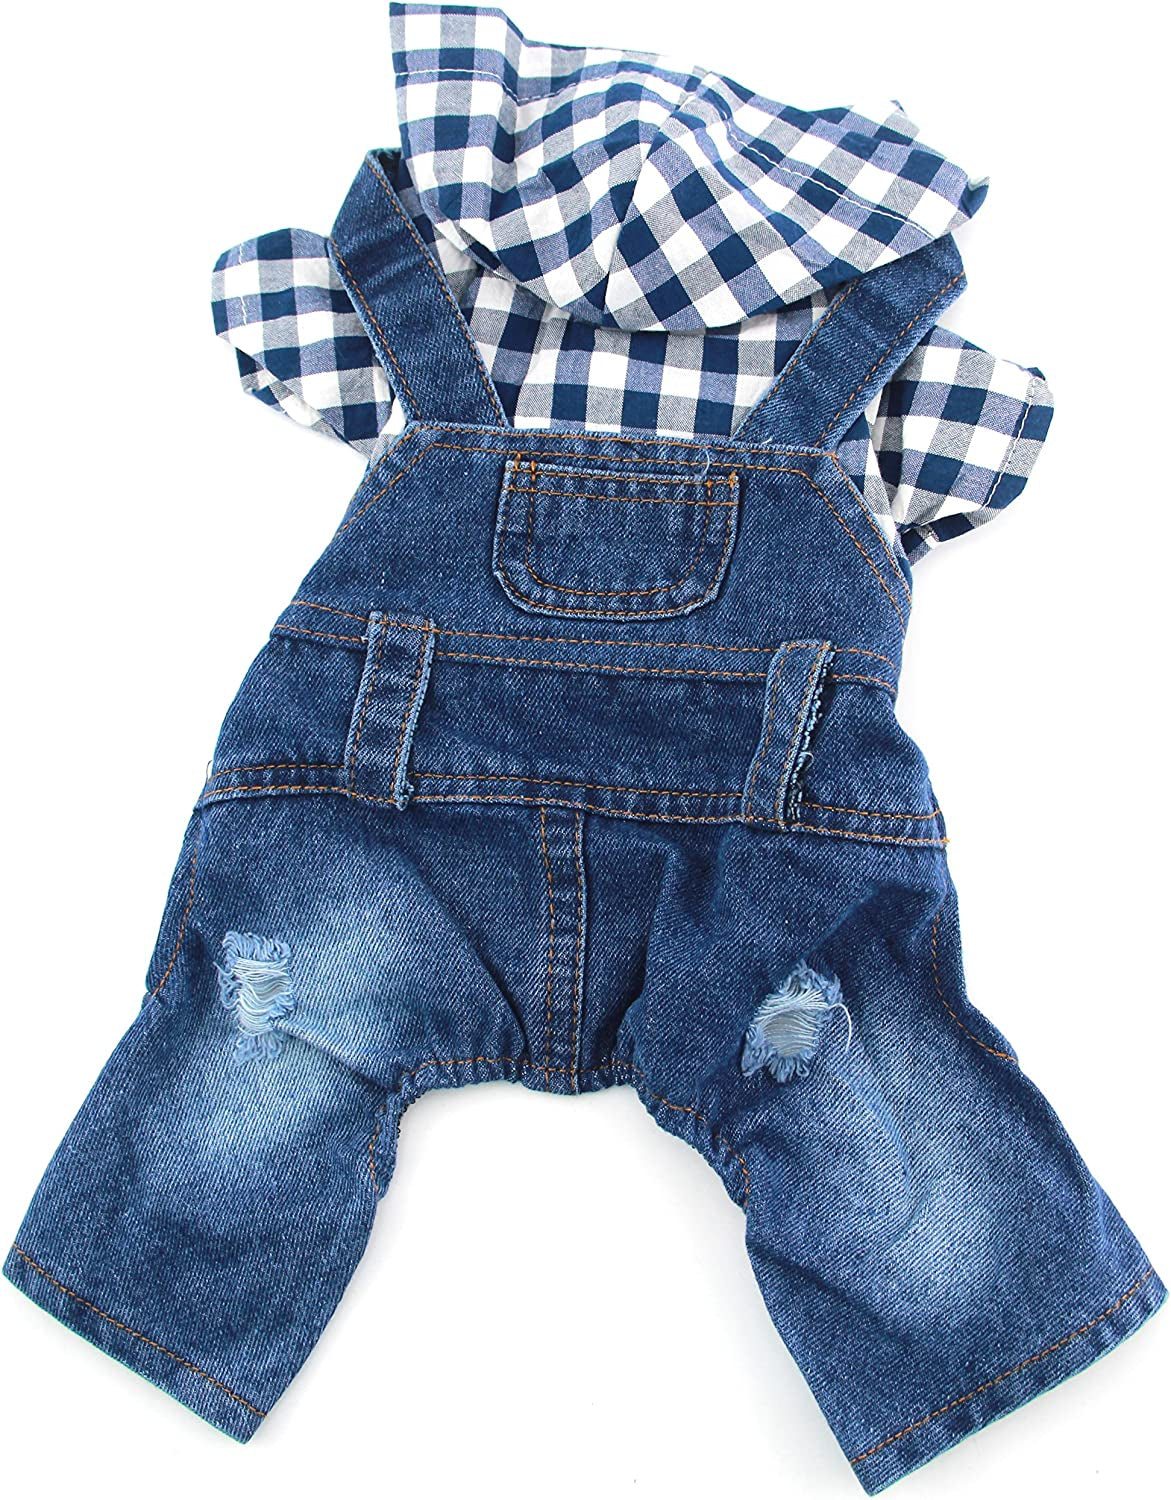 PETCARE Pet Dog Denim Jumpsuit Plaid Hoodies Puppy Overalls Doggy Jeans Jacket Clothes for Small Dogs Cats Chihuahua Yorkie Spring Summer Costume Outfit Animals & Pet Supplies > Pet Supplies > Dog Supplies > Dog Apparel Yi Wu Shi Jia Chong Dian Zi Shang Wu Shang Hang Blue XXL(Suggest 14-19 lbs) 